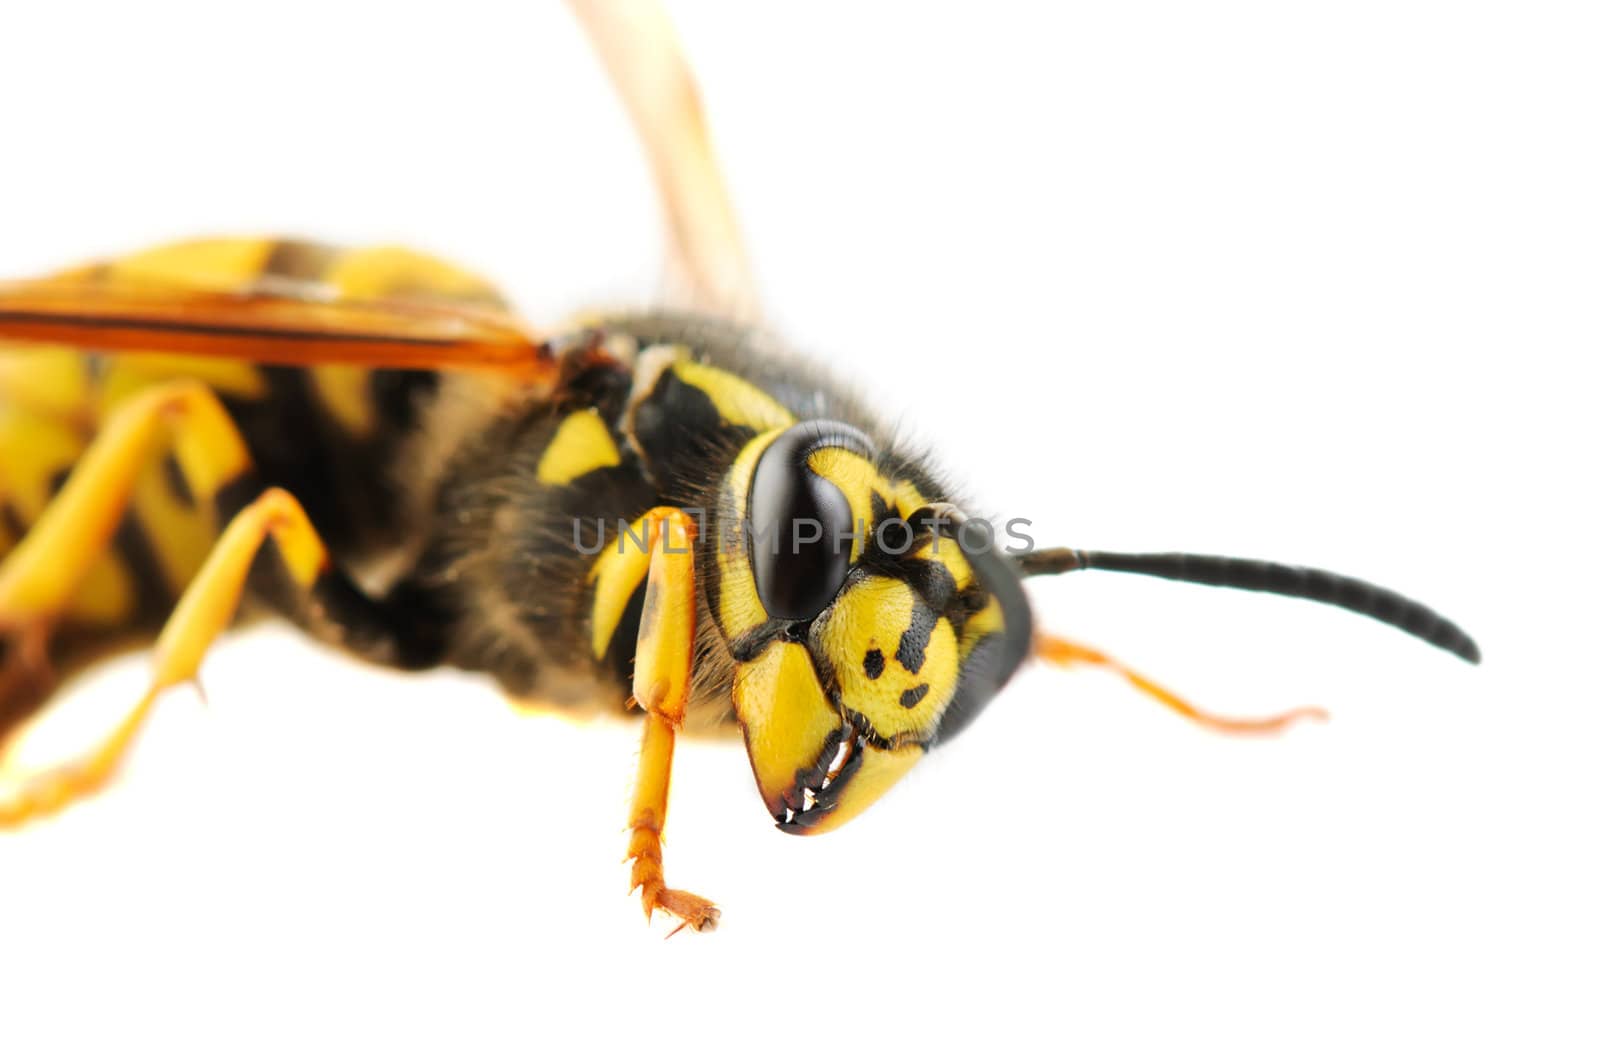 Wasp detailed portrait by Draw05